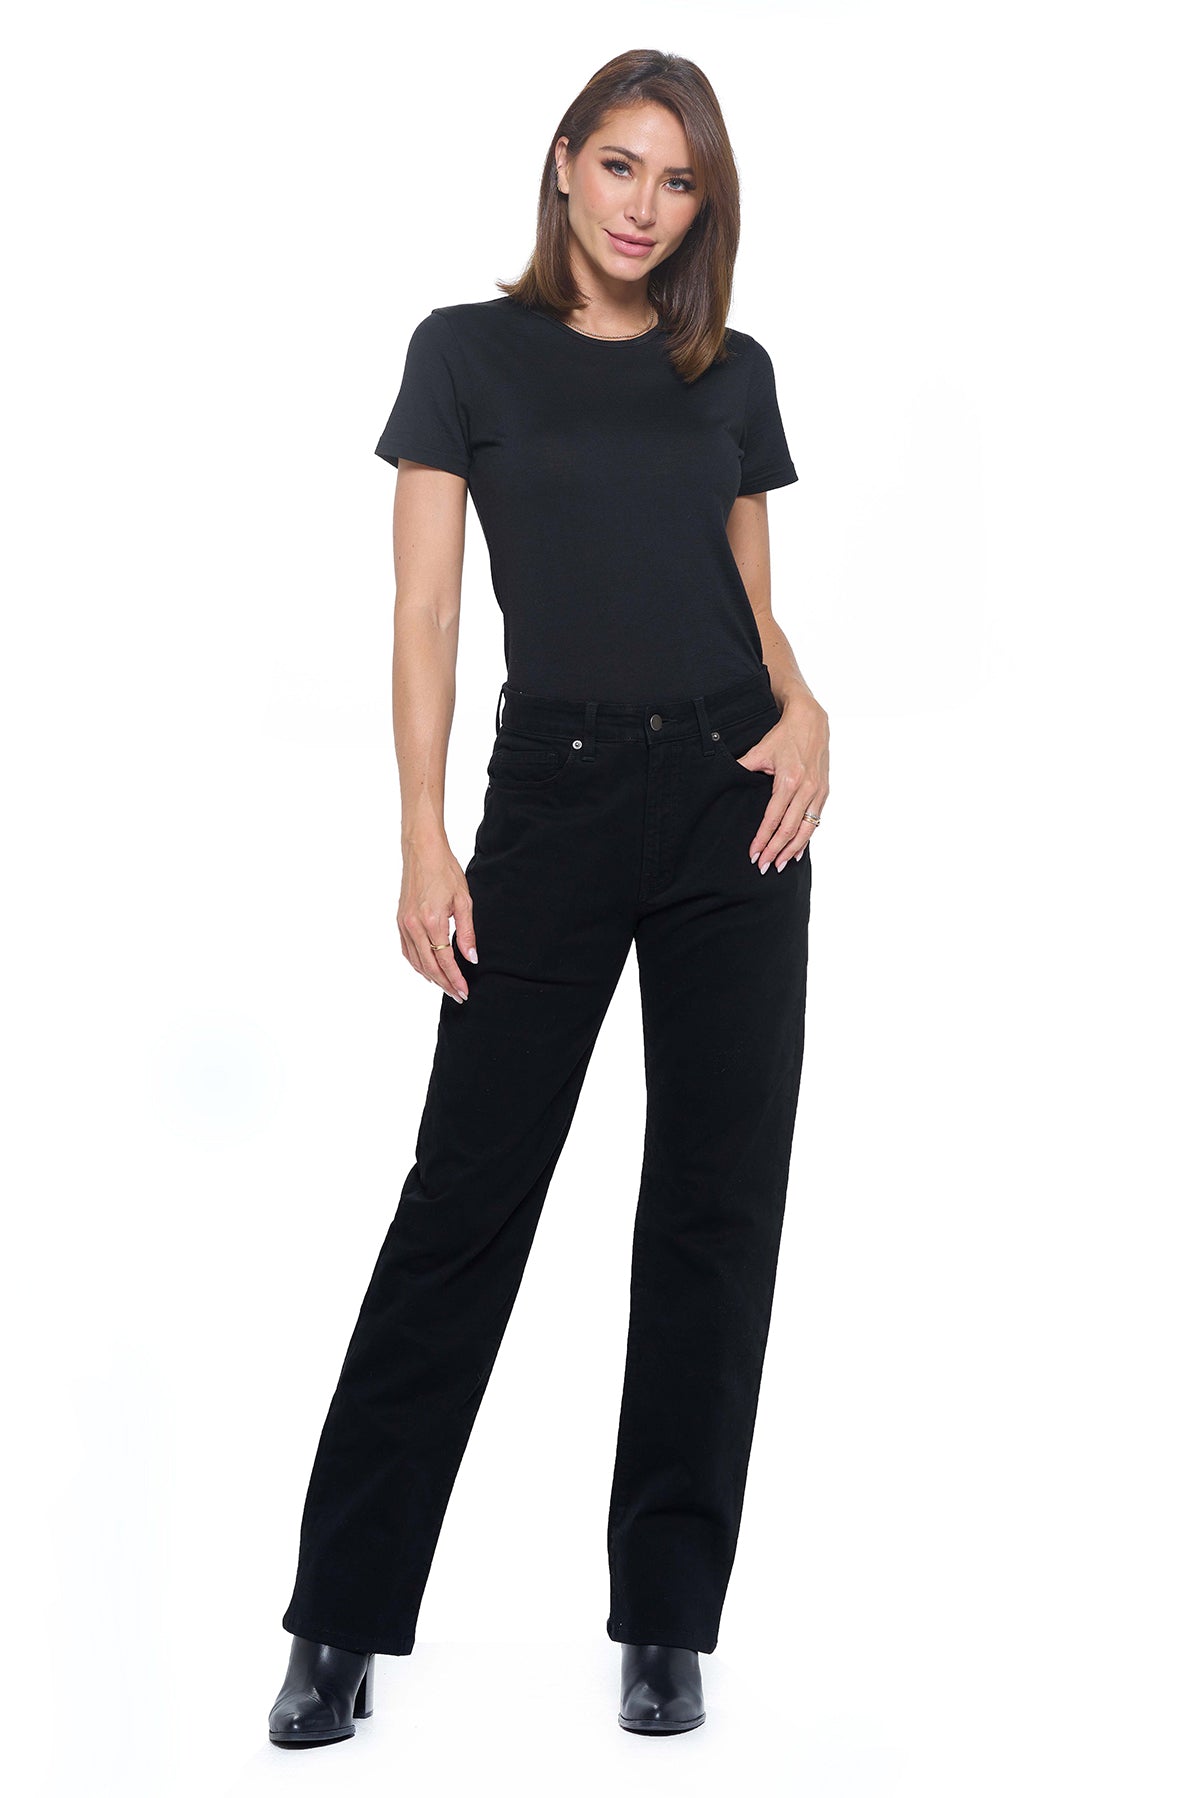 Best Travel Jeans for Women, Relaxed